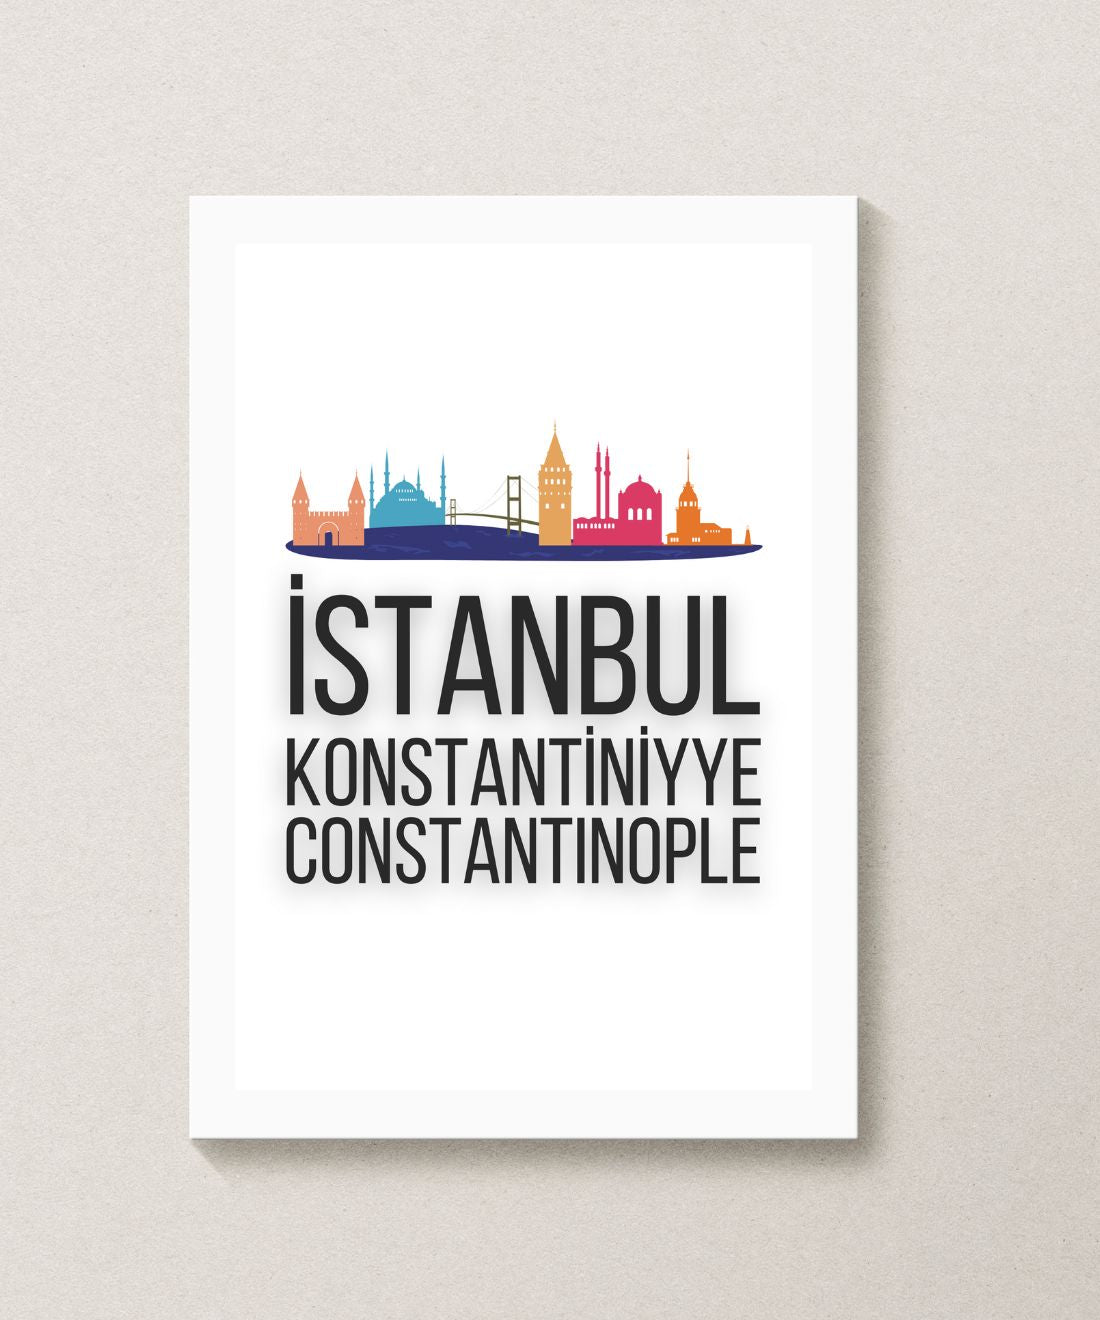 turkey posters - istanbul constantinople